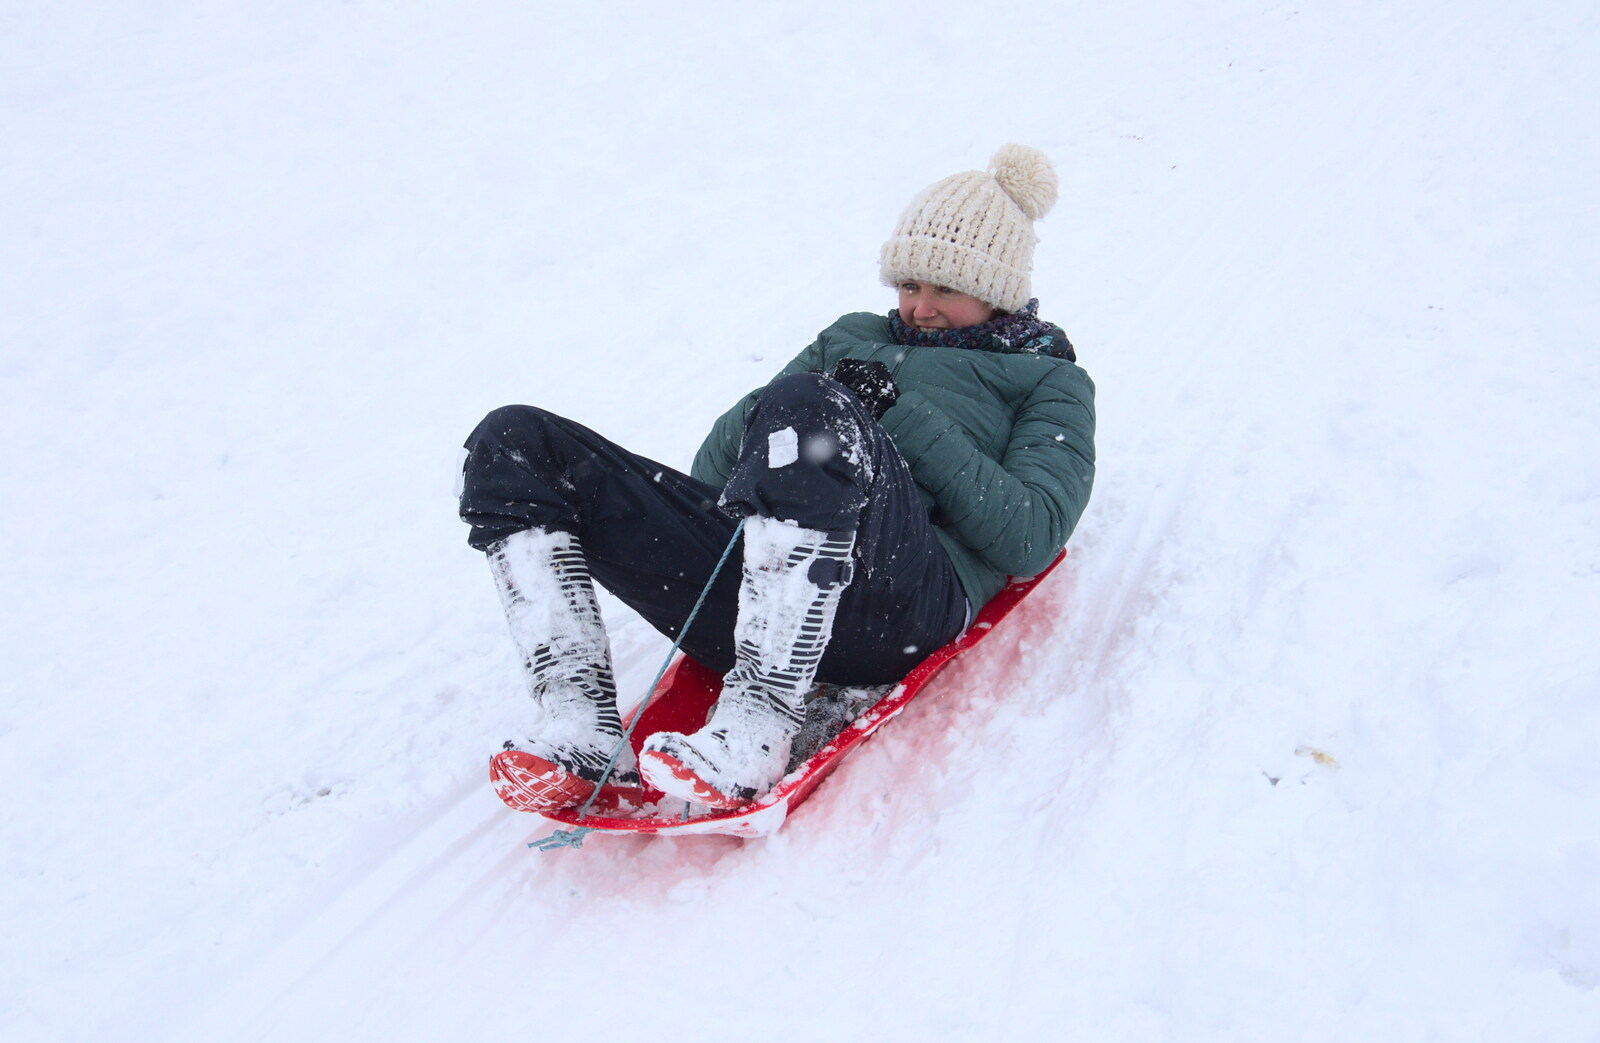 Isobel slides down the hill from The Beast From the East: Snow Days, Brome, Suffolk - 28th February 2018